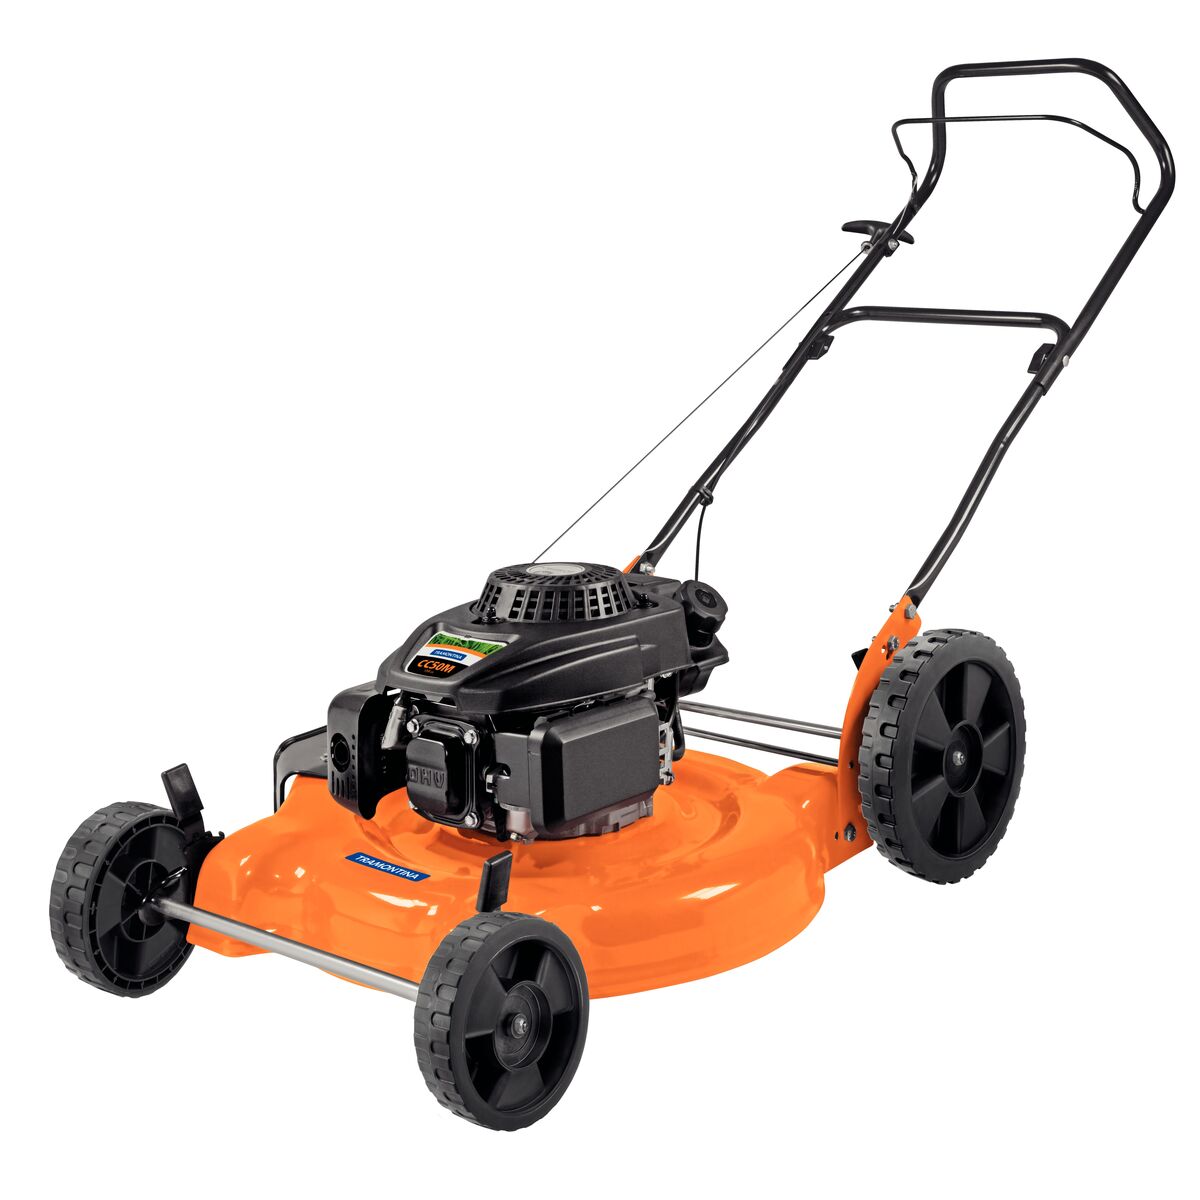 Tramontina's CC50M Gas Lawn Mower with a 500 mm Cutting Diameter, Metallic Chassis, and 6 hp Engine